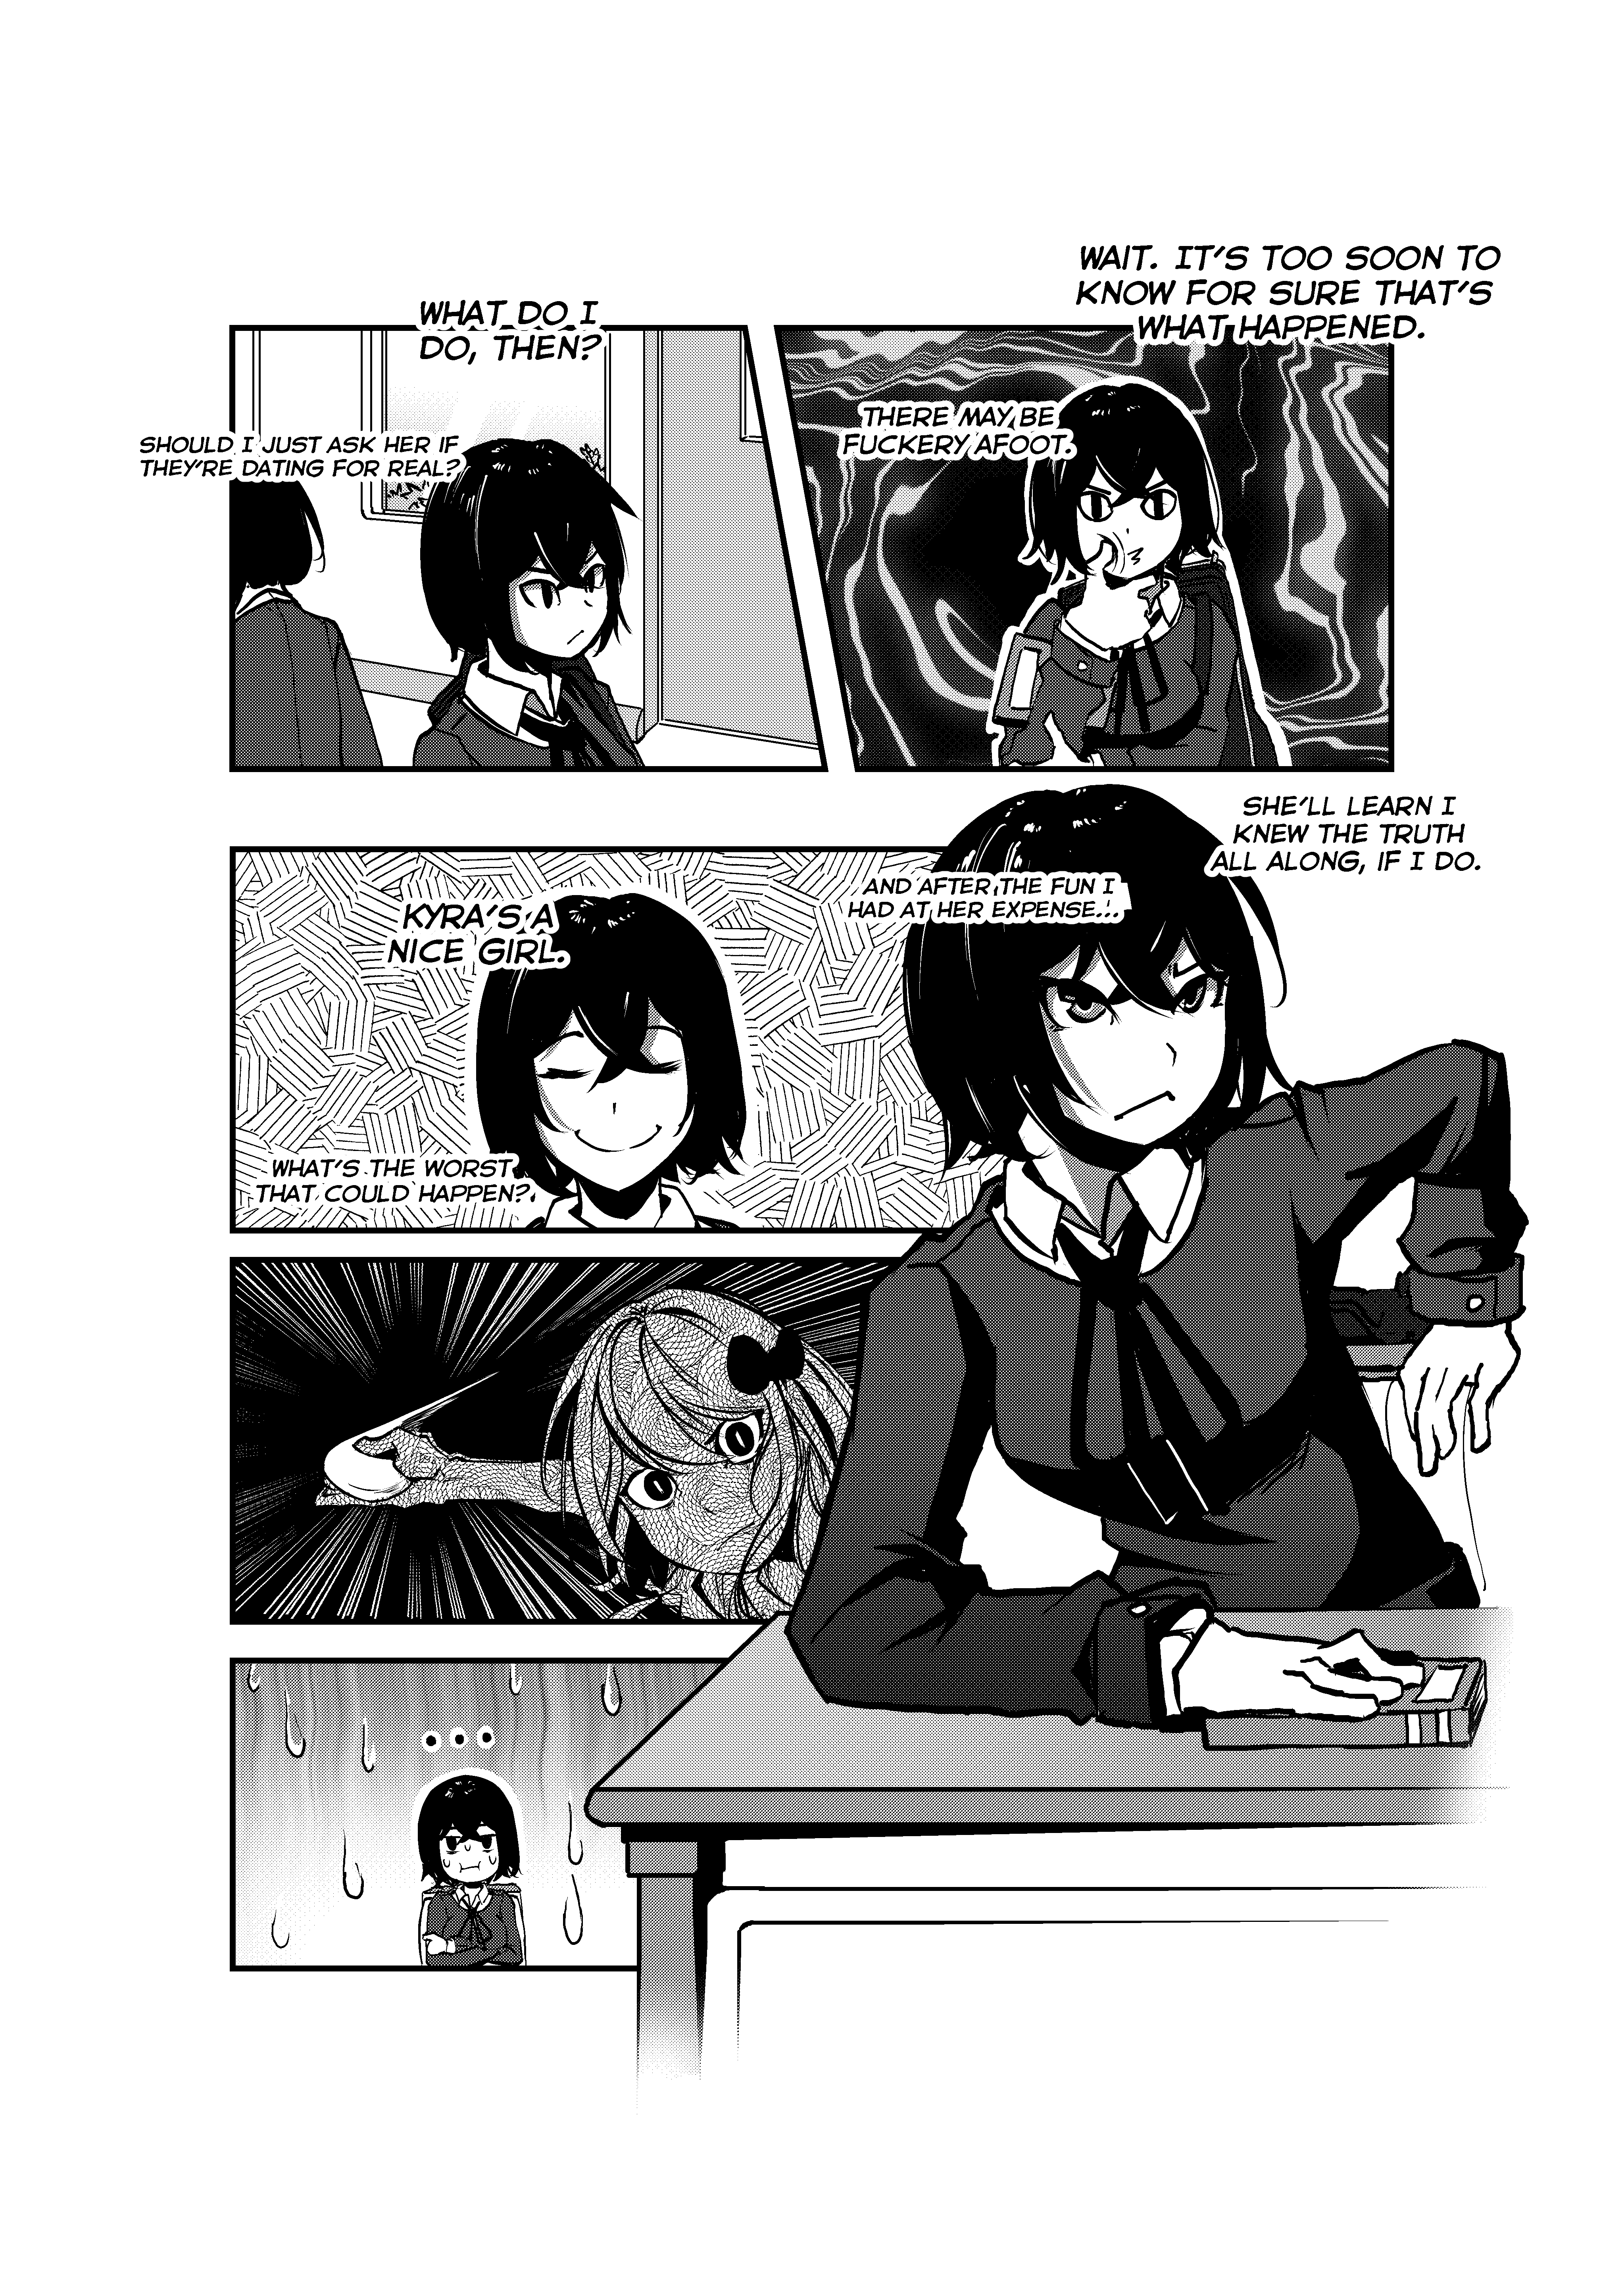 Opposites In Disguise - 19 page 4-24c6dd96